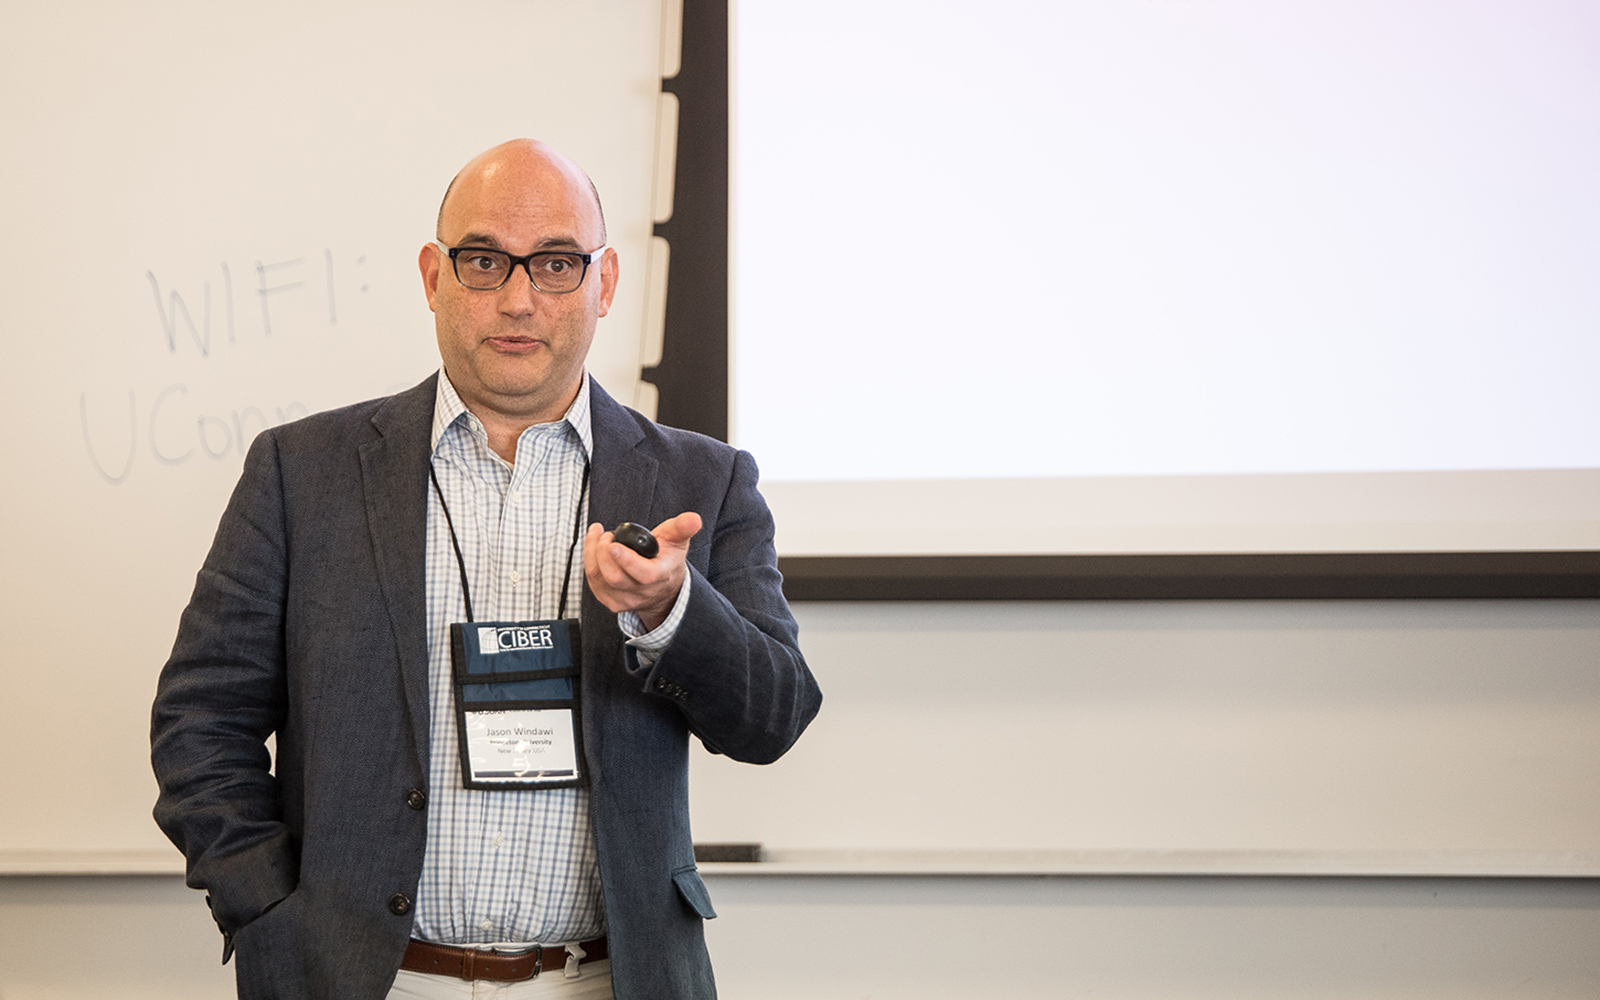 A. Jason Windawi, a Ph.D. student at Princeton University, explained his research about "Building on the Blockchain: The Interplay of Organization and Technology in Emergent Field.'' (Nathan Oldham/UConn School of Business)